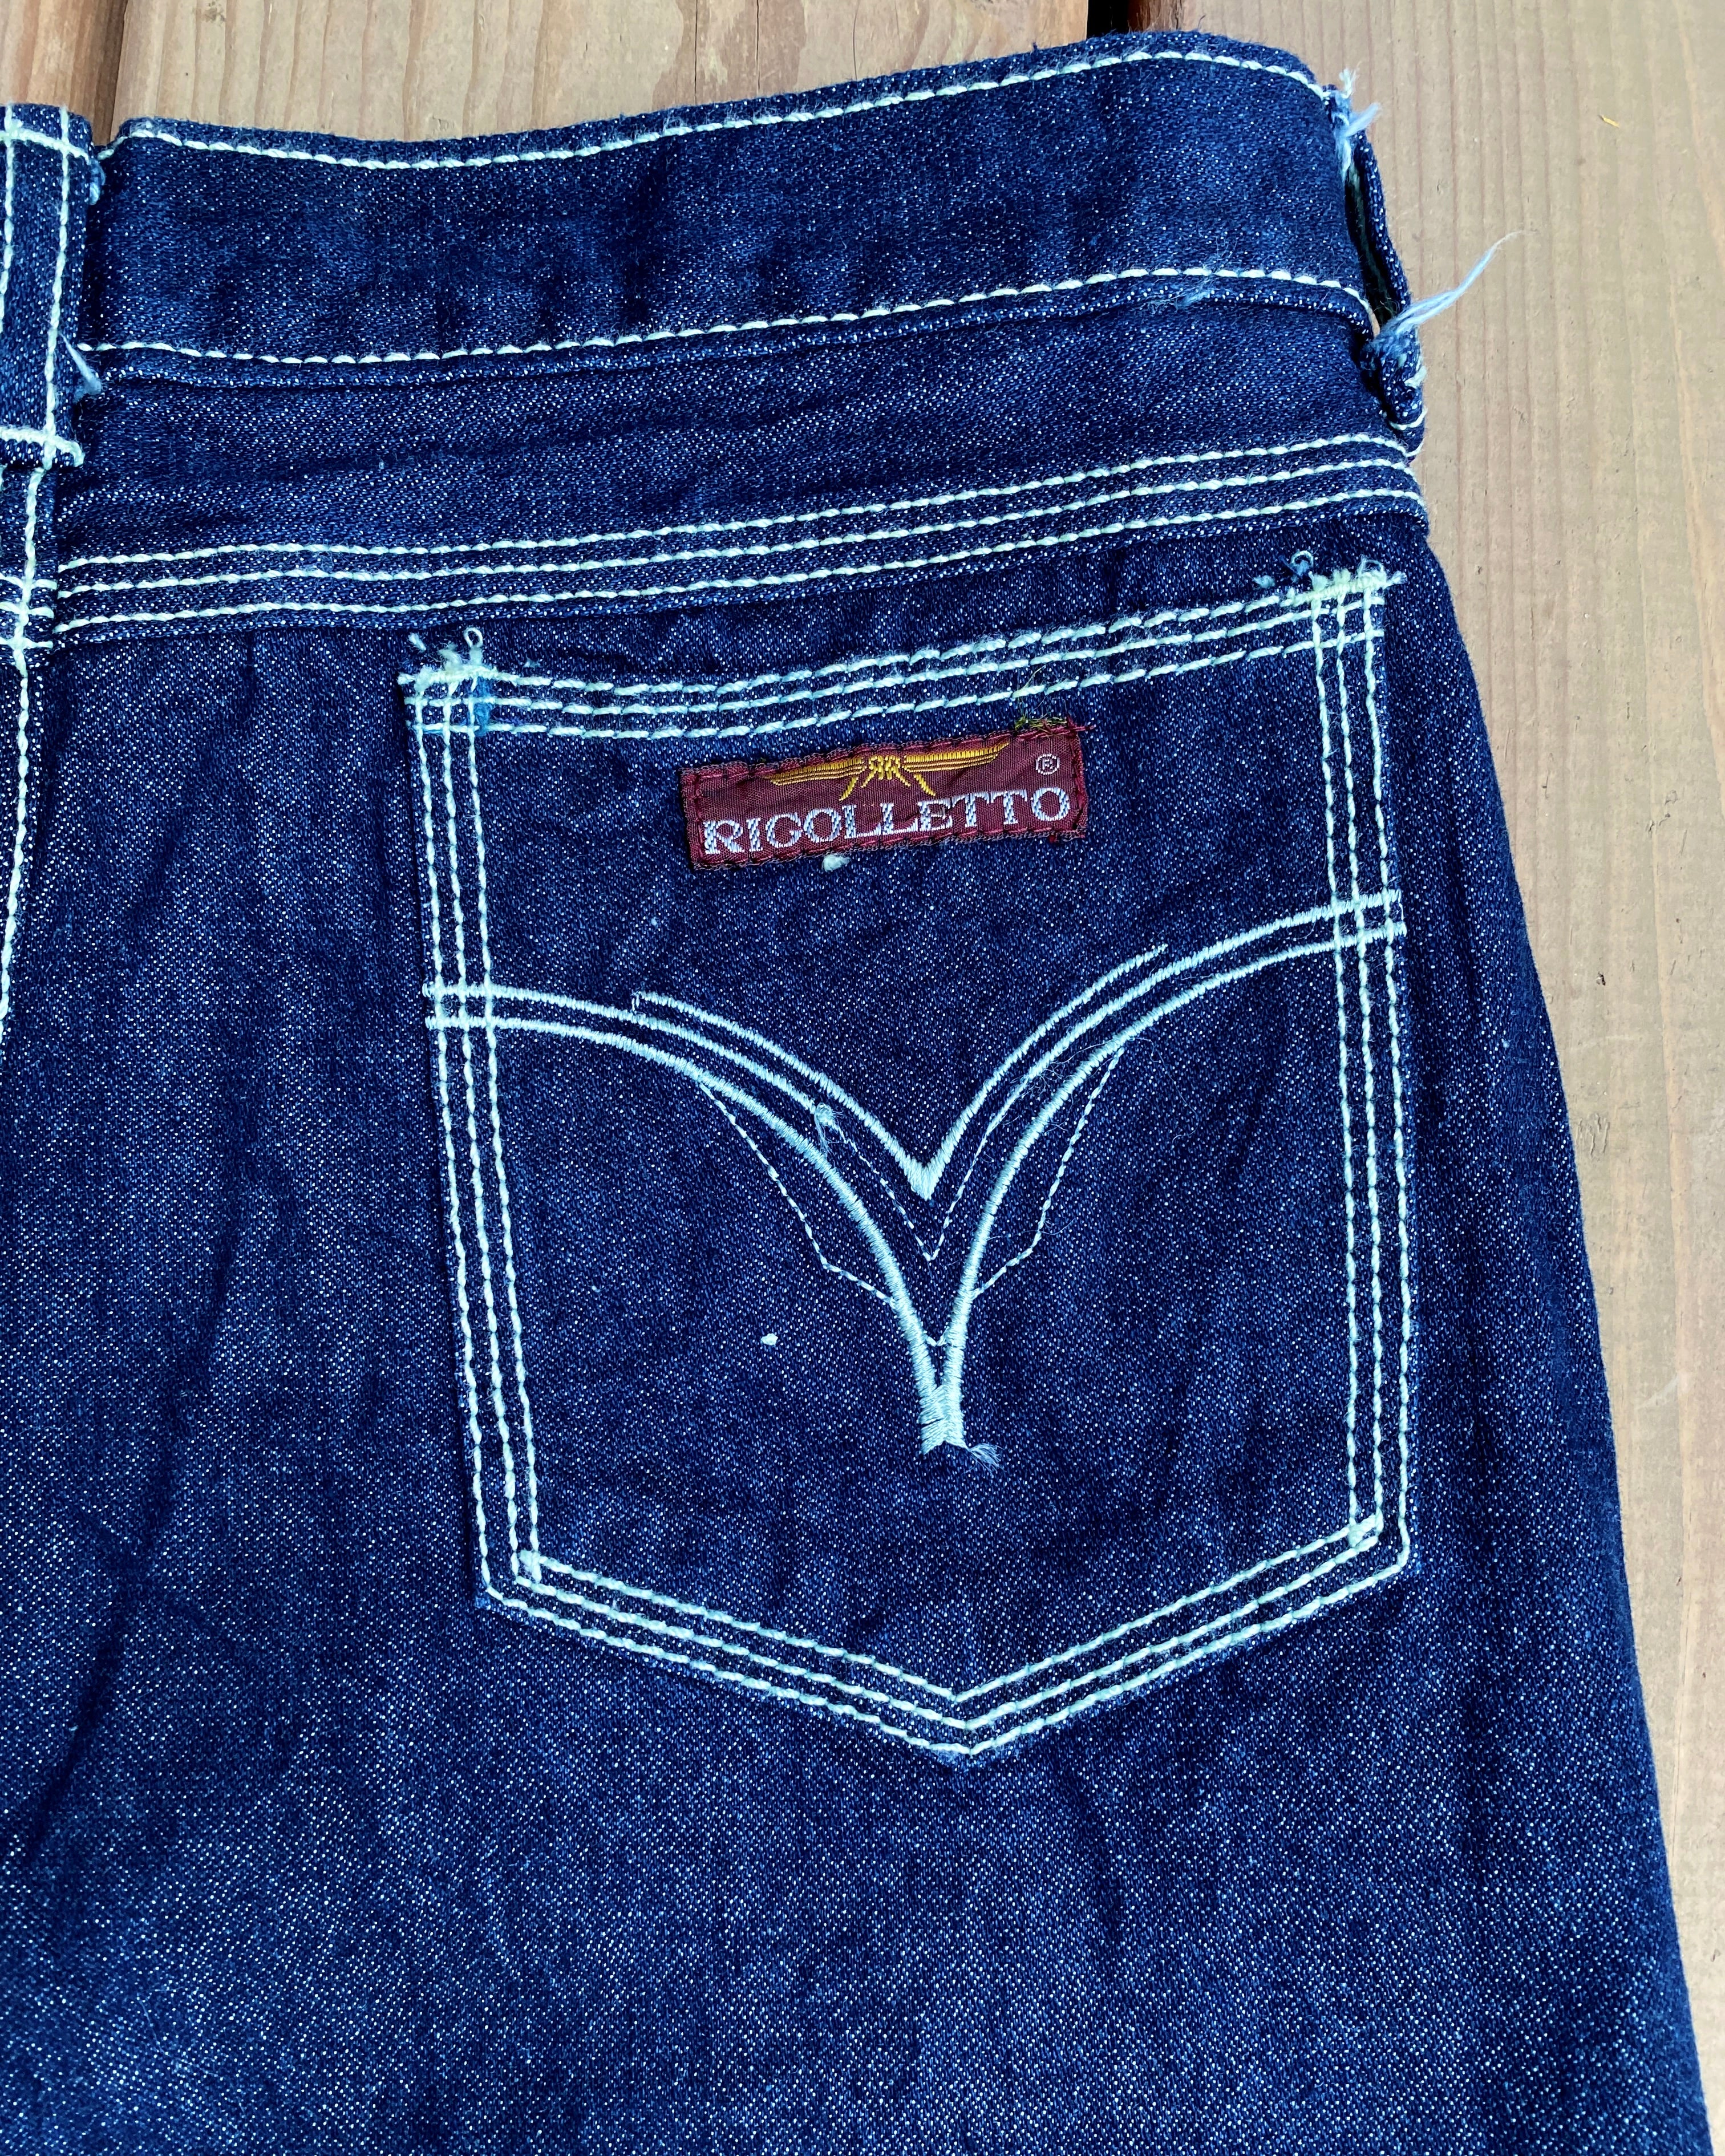 Vintage Deadstock NWT 1970s High Waisted Rigolletto Raw Denim Jeans size 28